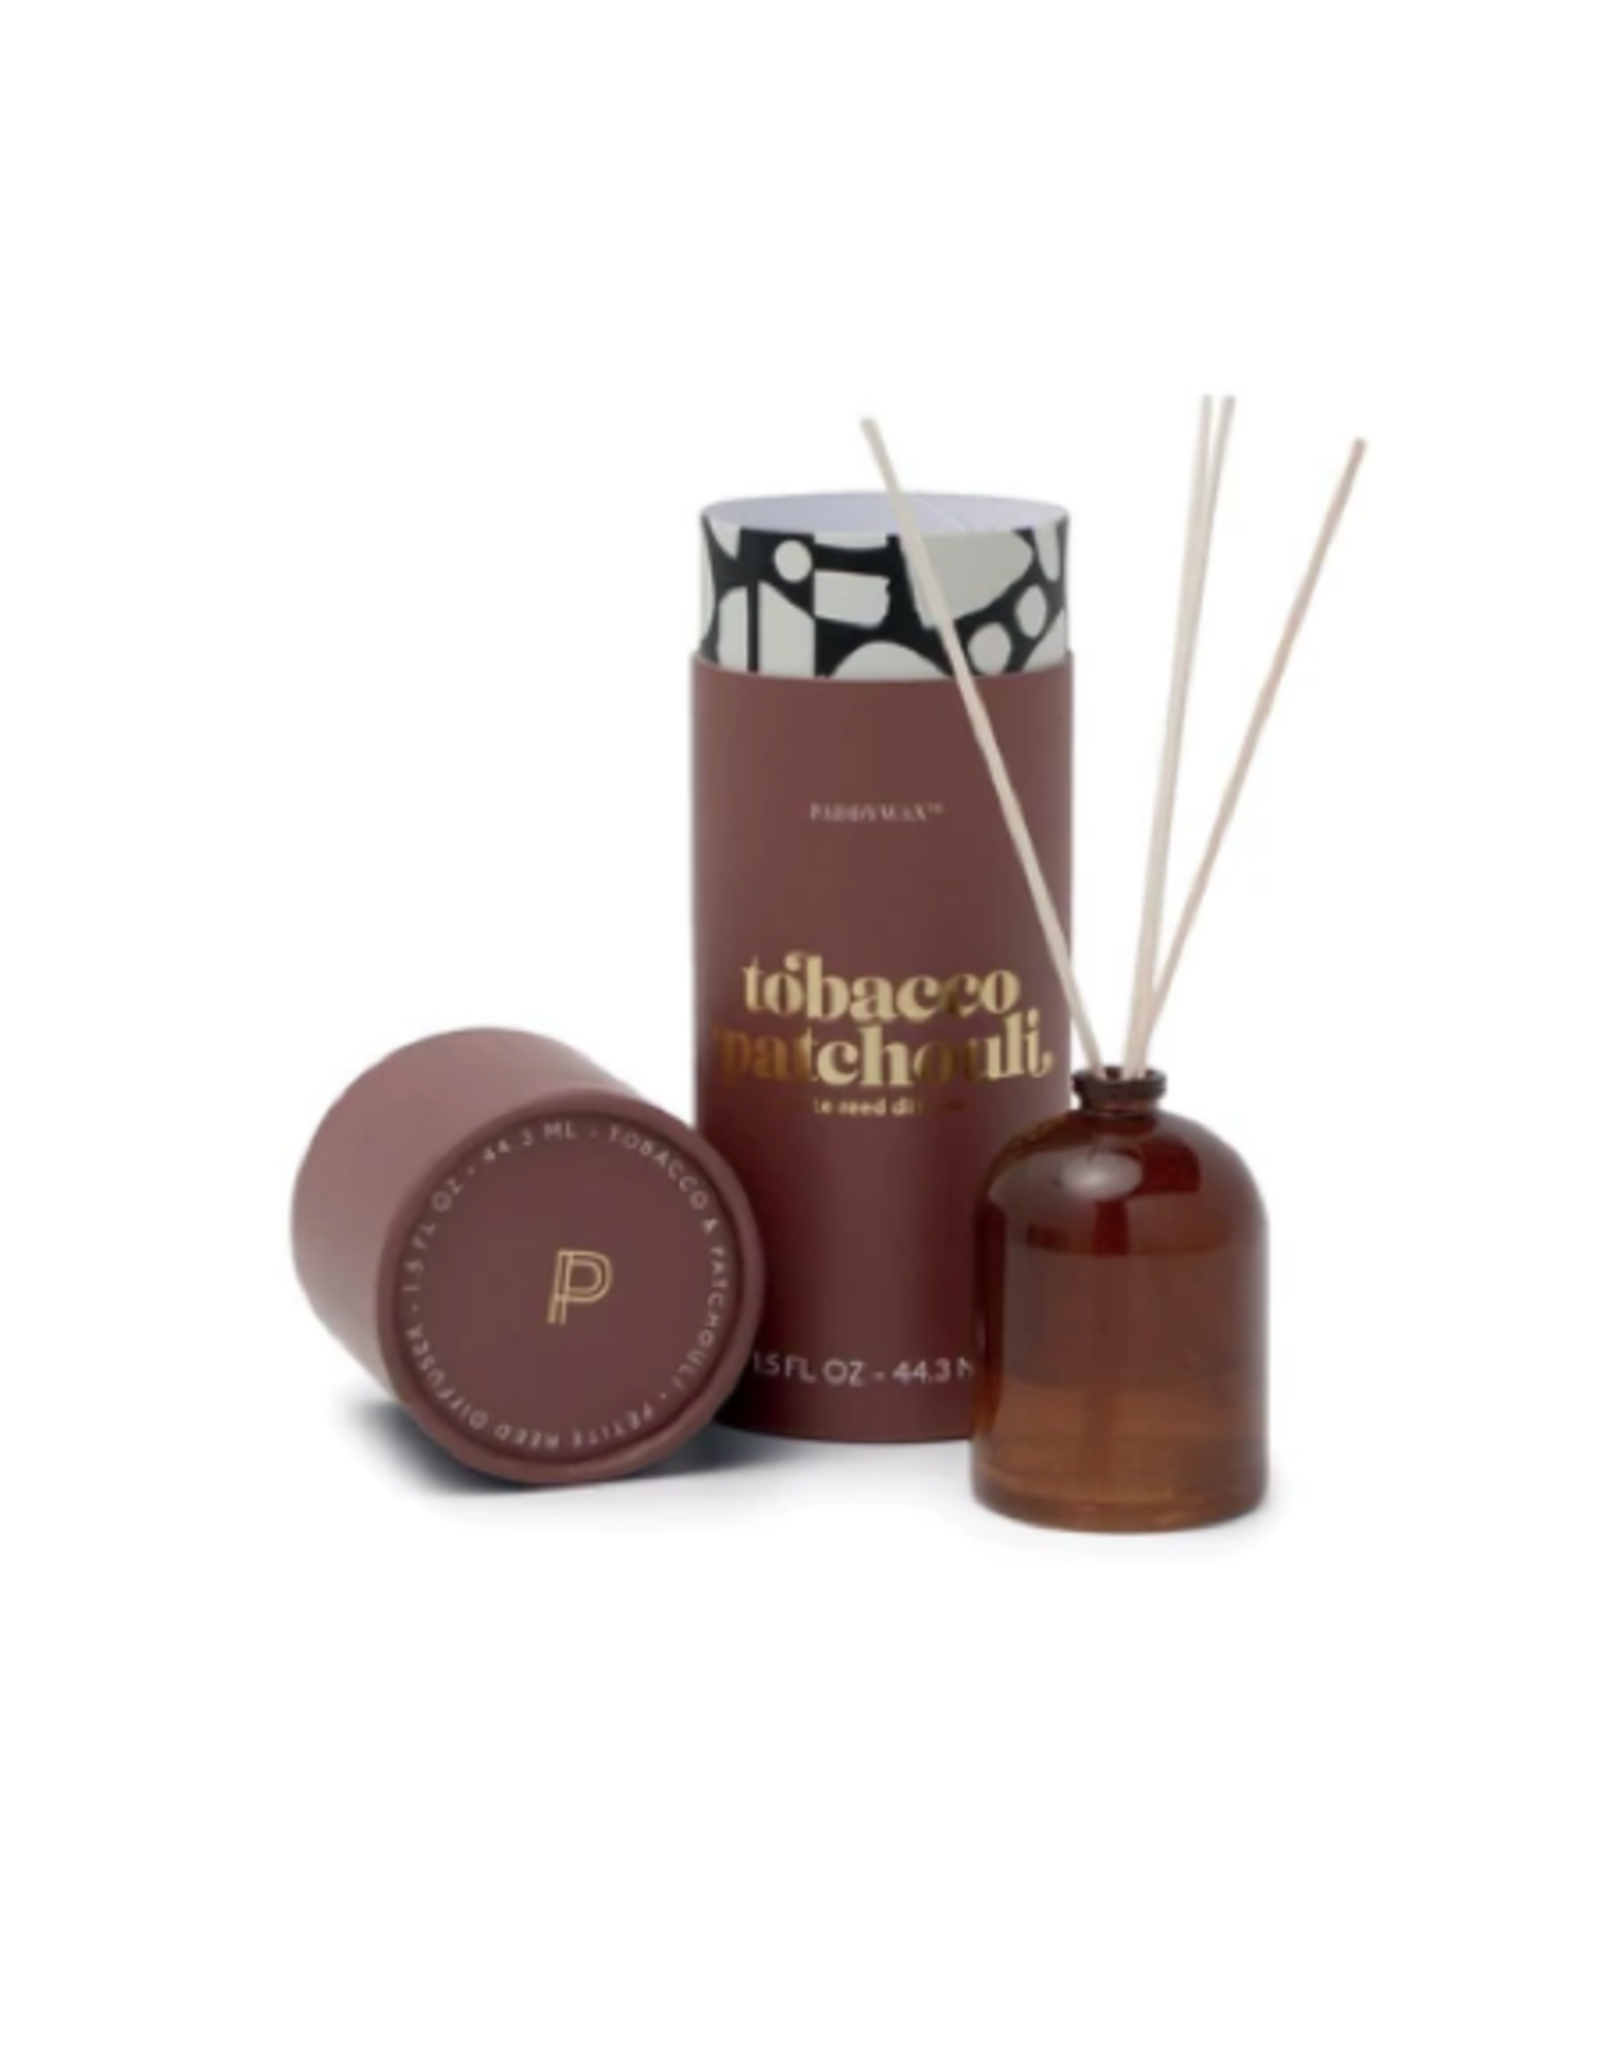 PAX - Reed Diffuser Boxed Set / Tobacco Patchouli, Amber Glass, 1.5oz